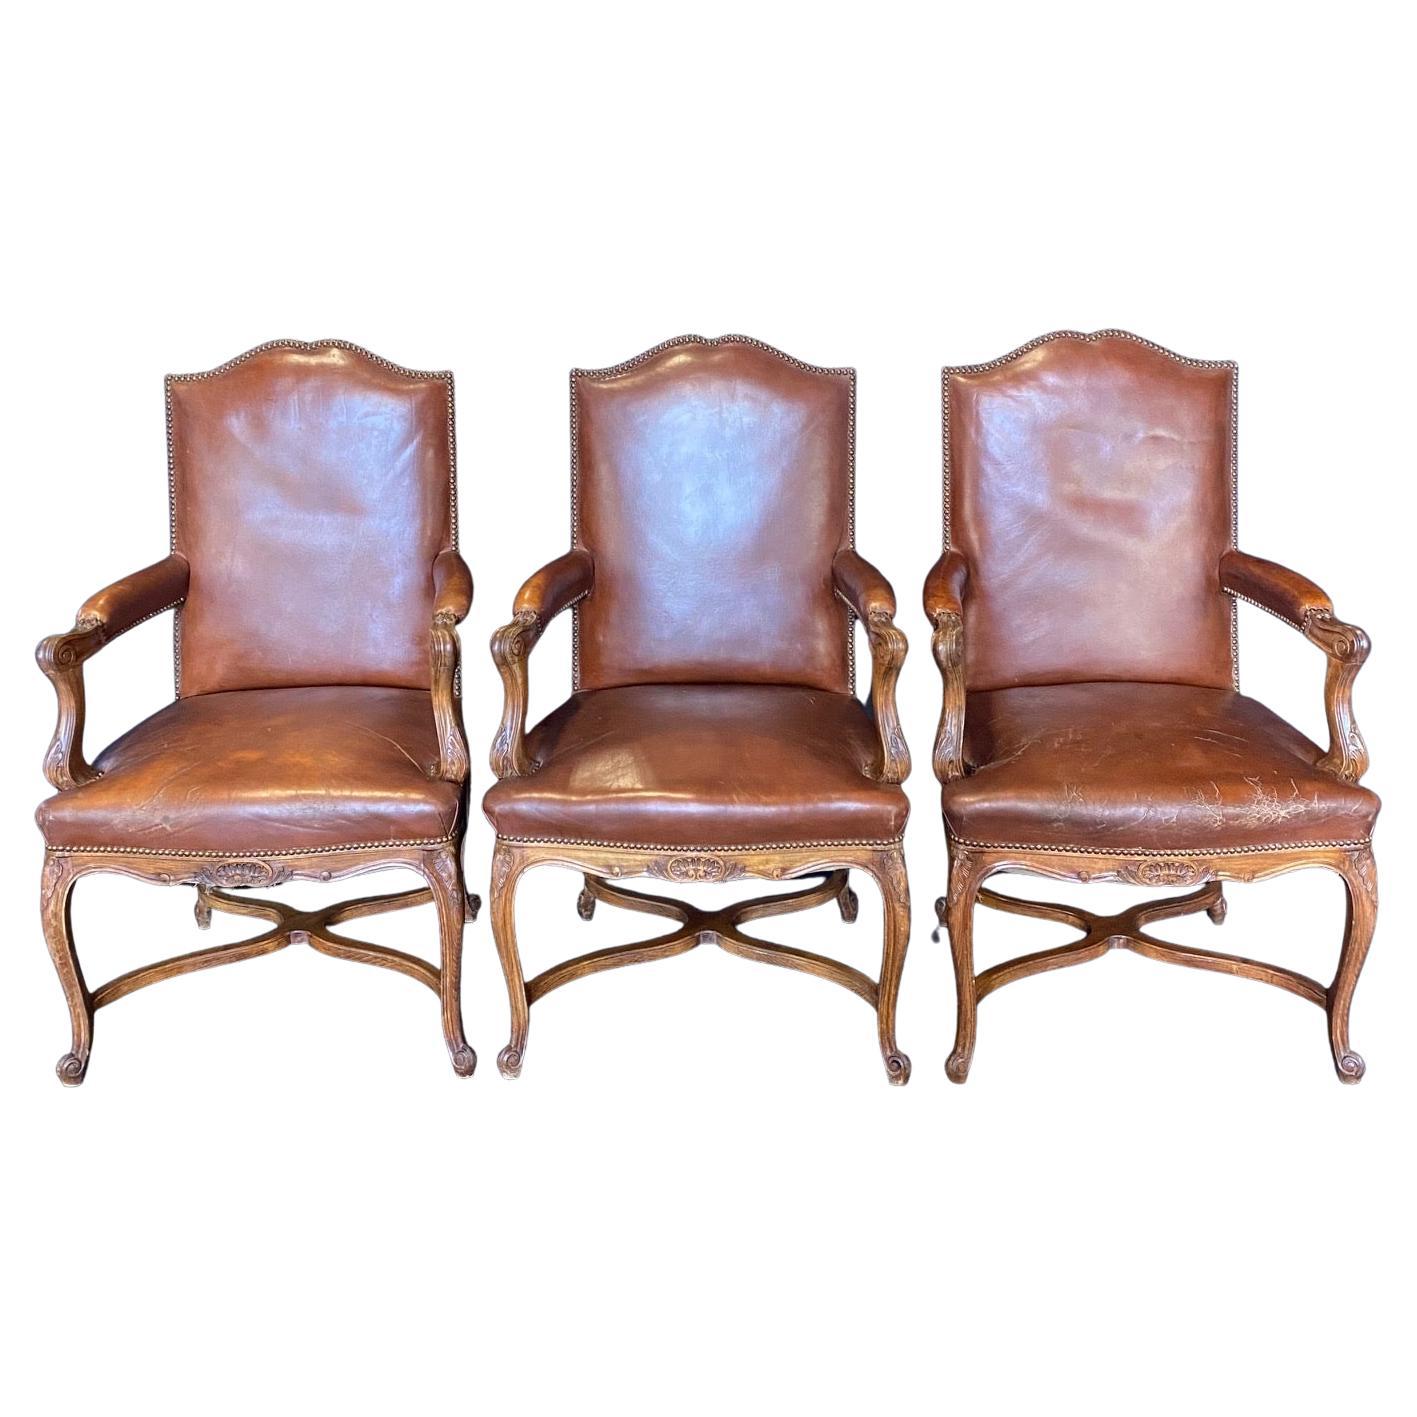 Classic Set of Three French Carved Wood and Leather Bergere Arm Chairs